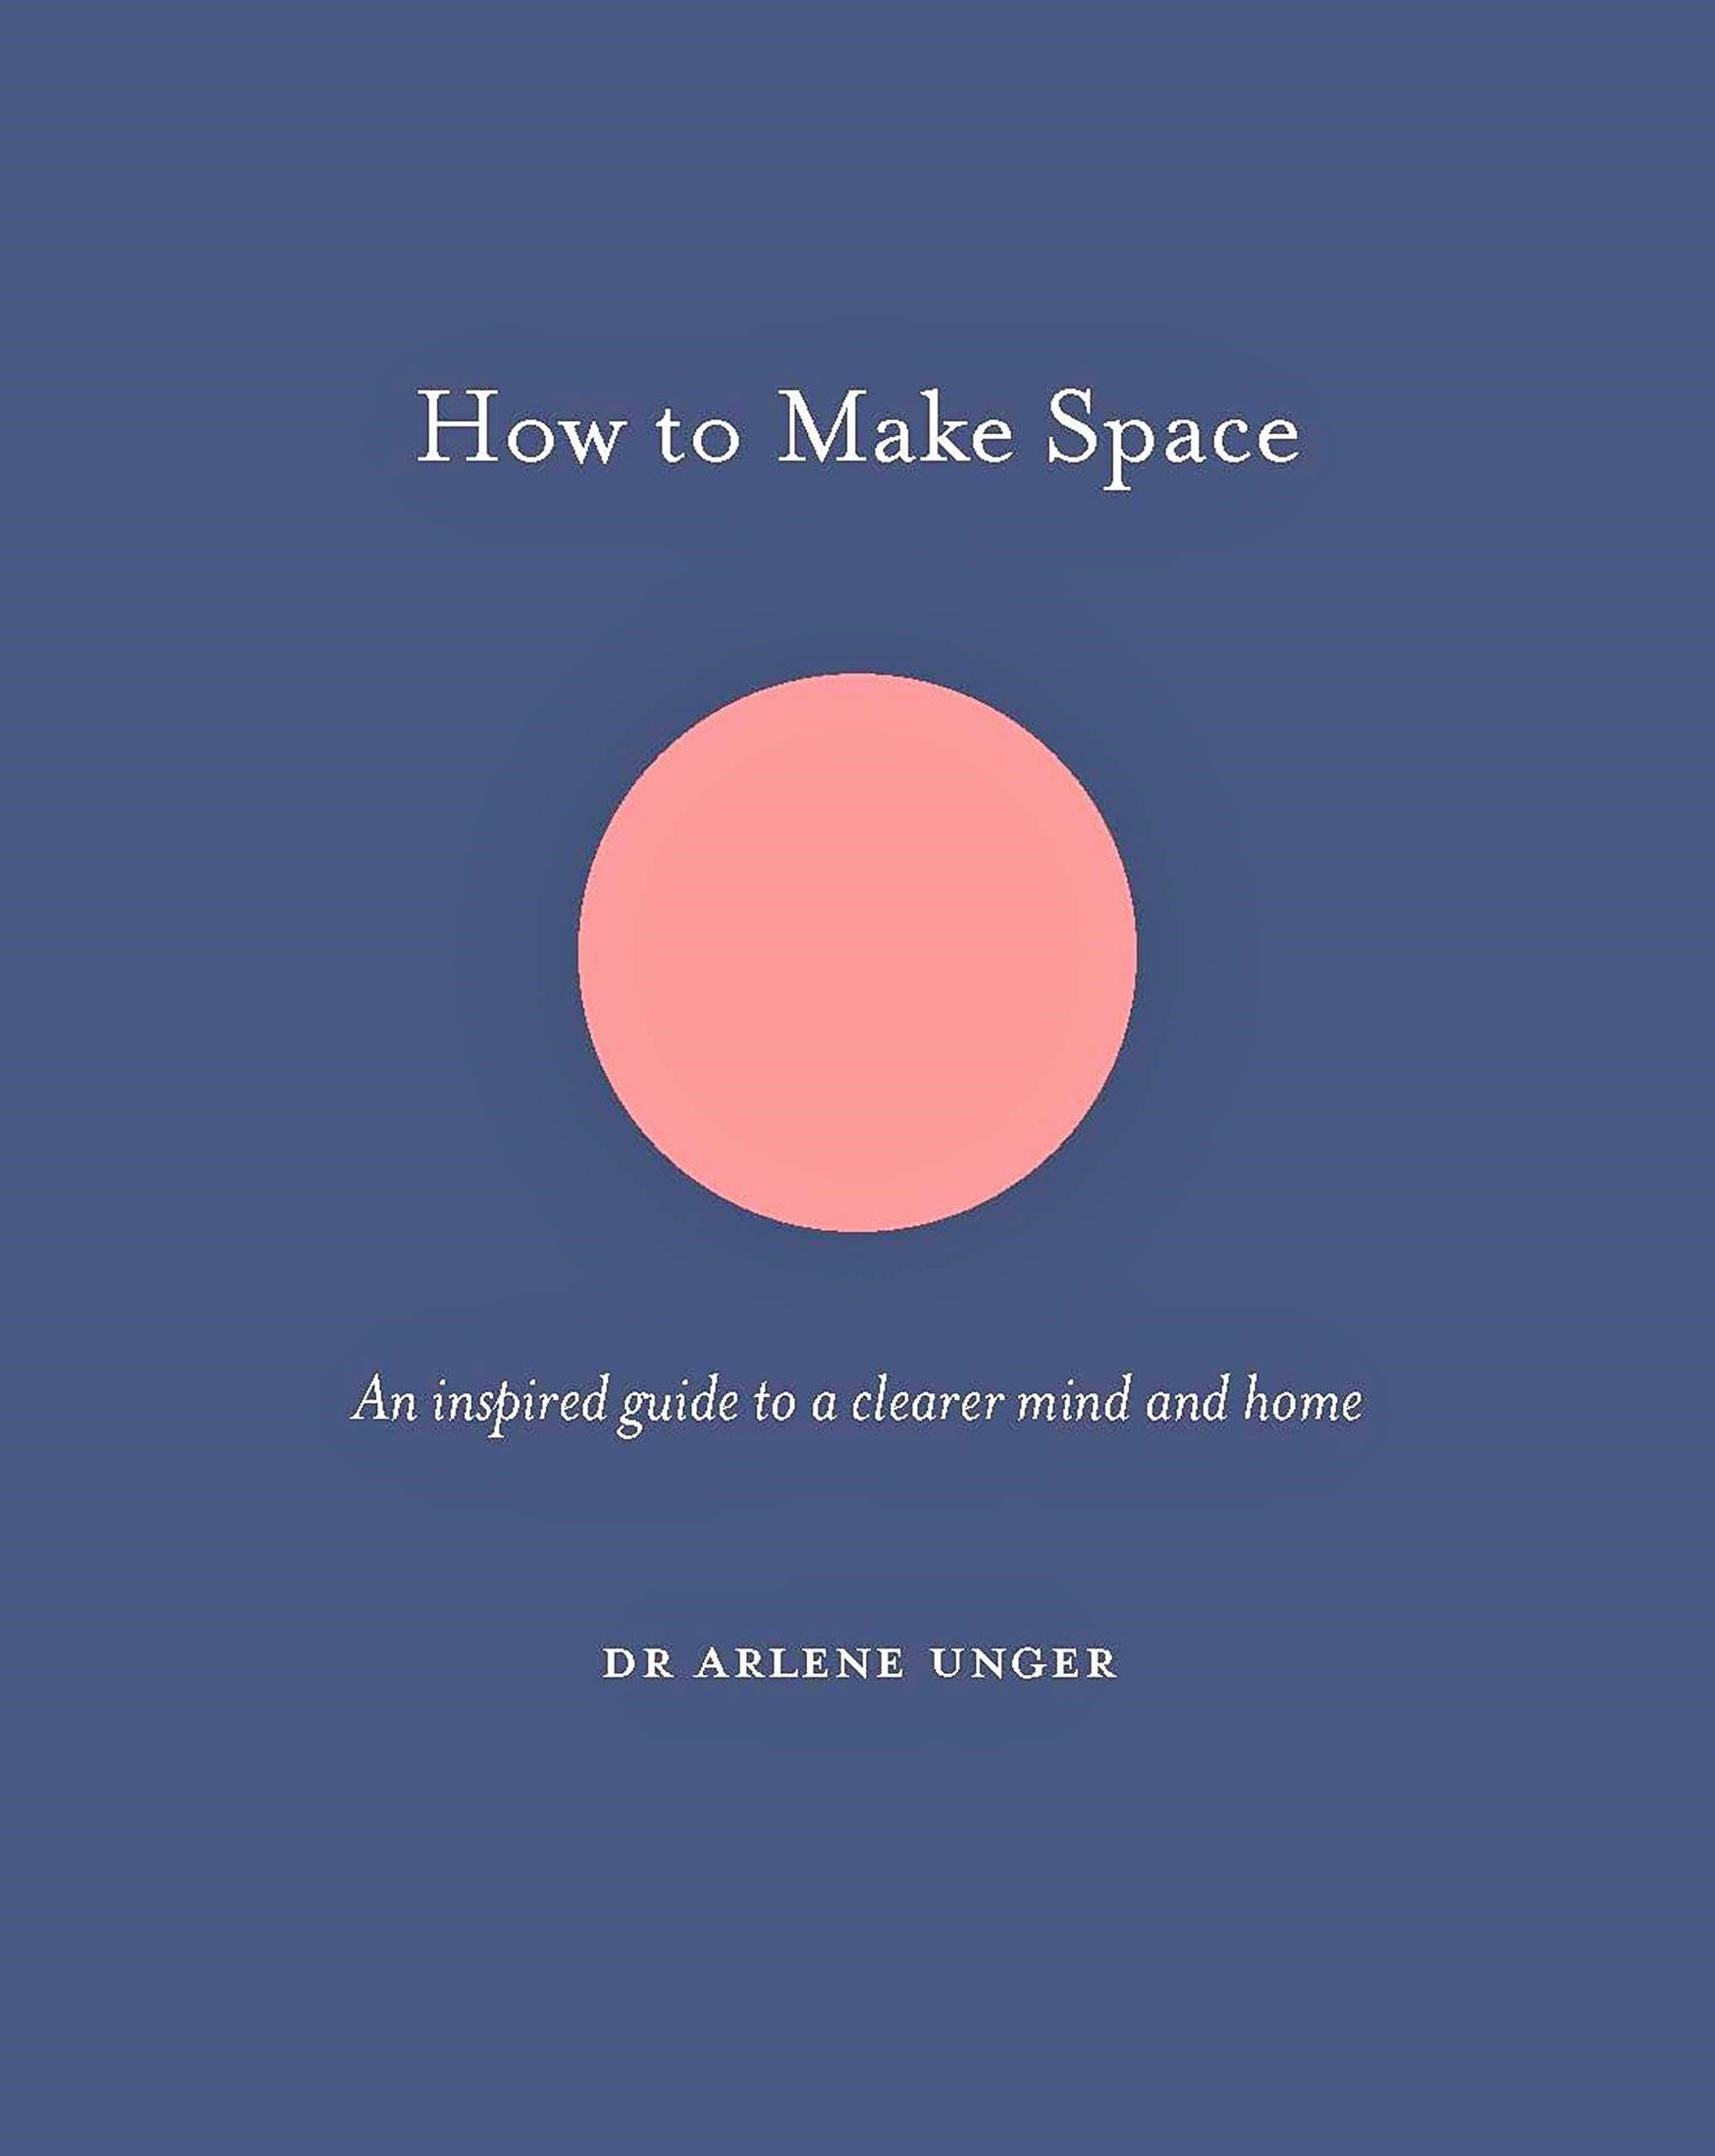 How to Make Space: Inspired Guide to a Clearer Mind & Home